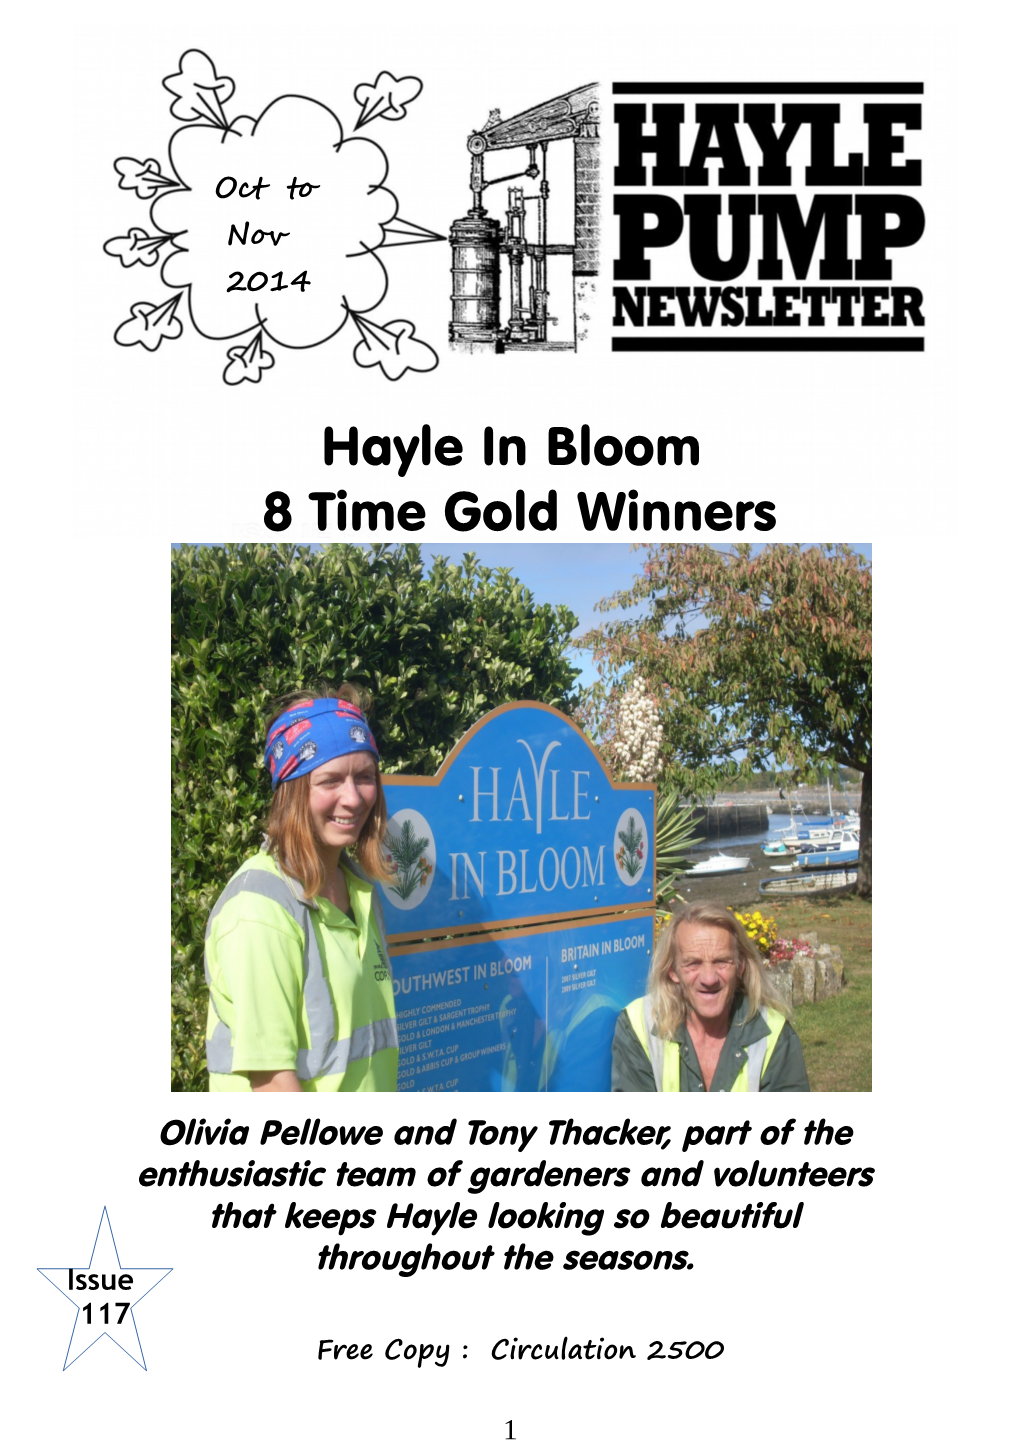 Hayle in Bloom 8 Time Gold Winners